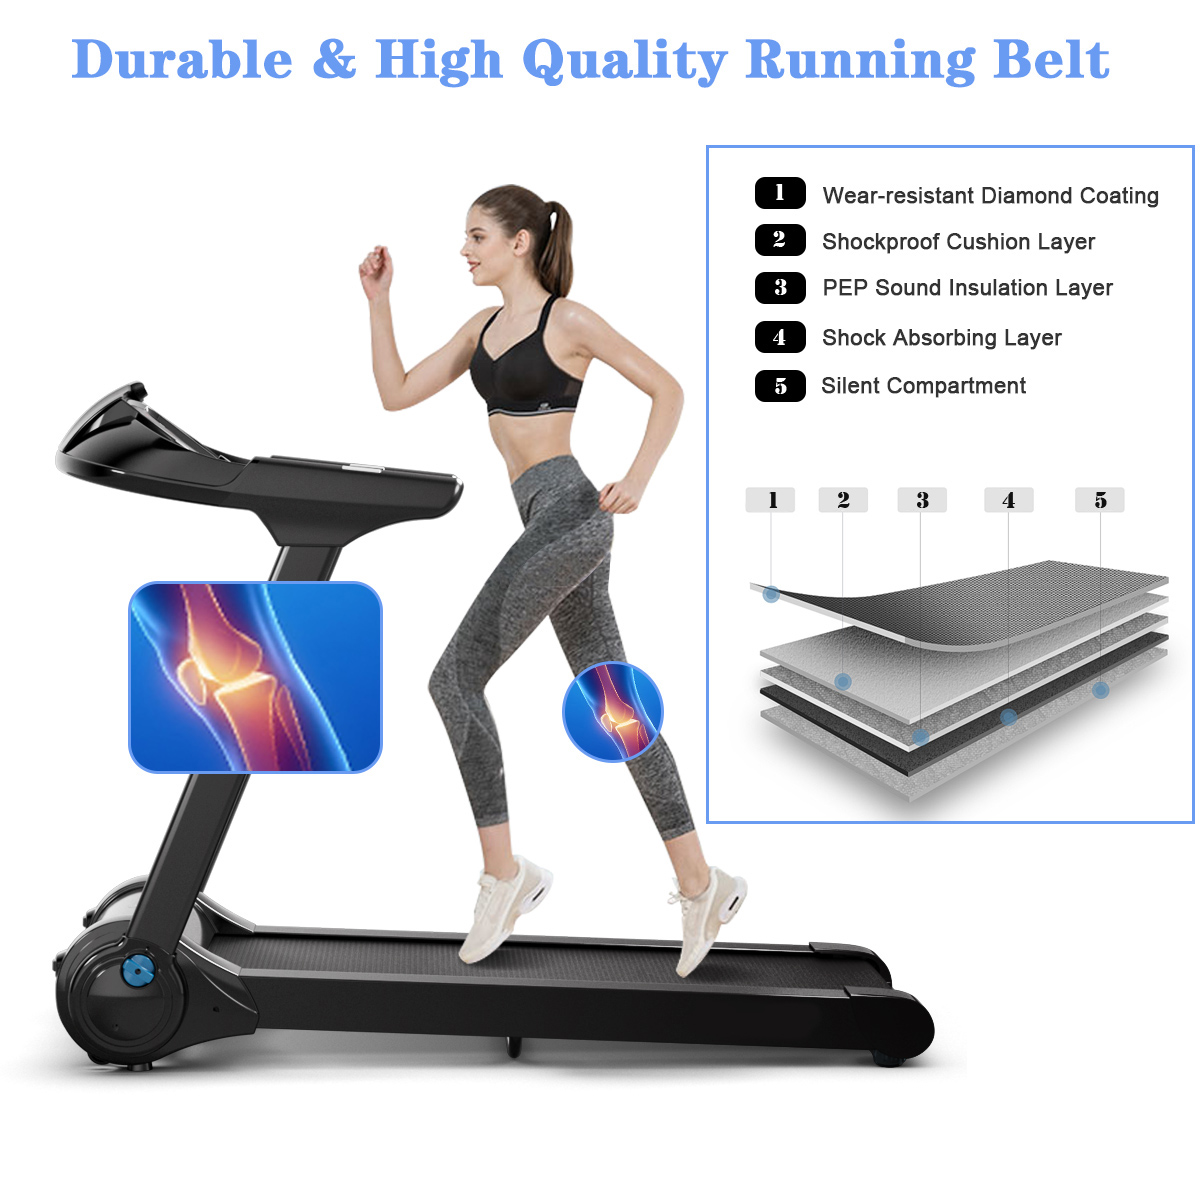 Gymax 2.25HP Electric Folding Fitness Treadmill w/APP Heart Rate - image 4 of 10